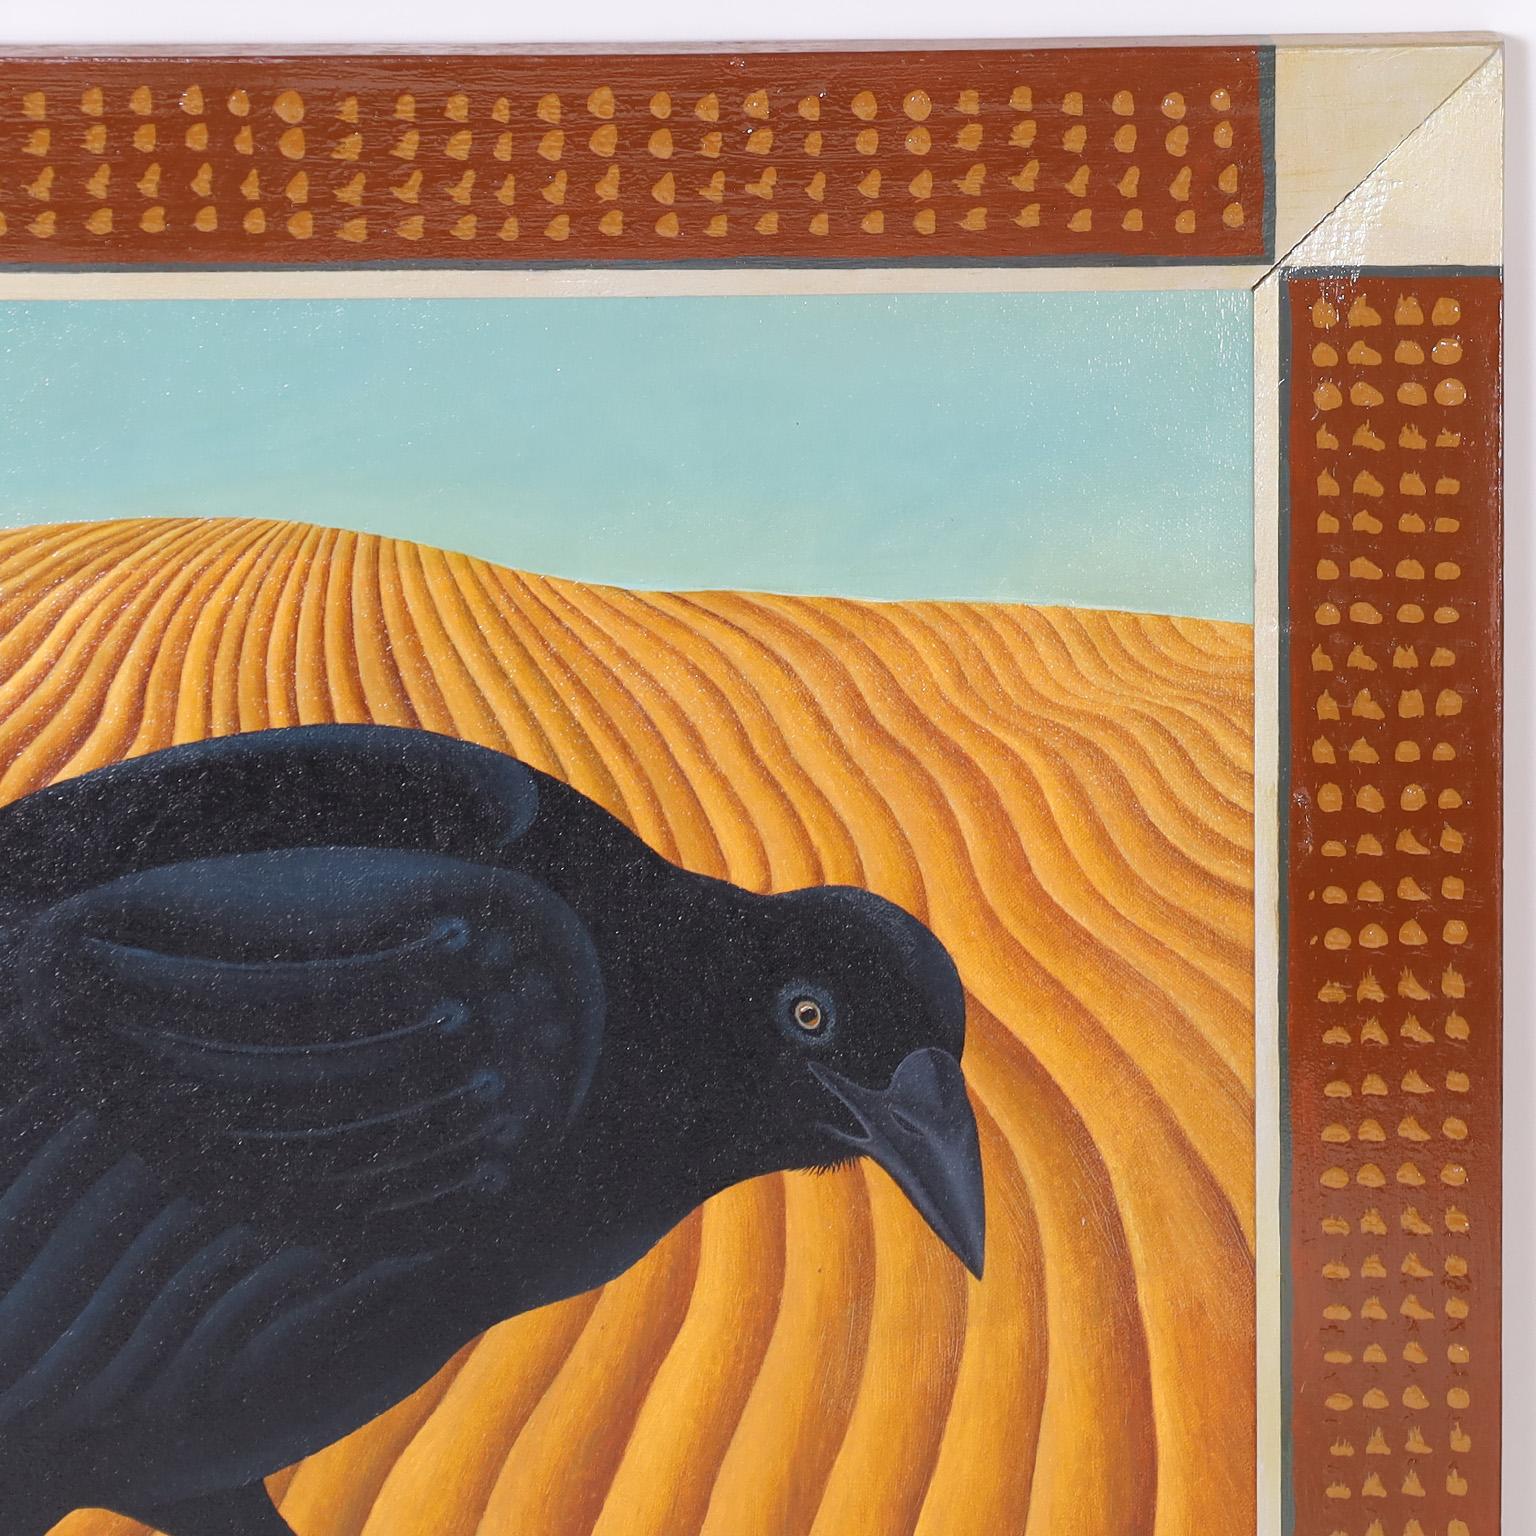 Painting on Canvas of a Crow - Orange Animal Painting by Unknown